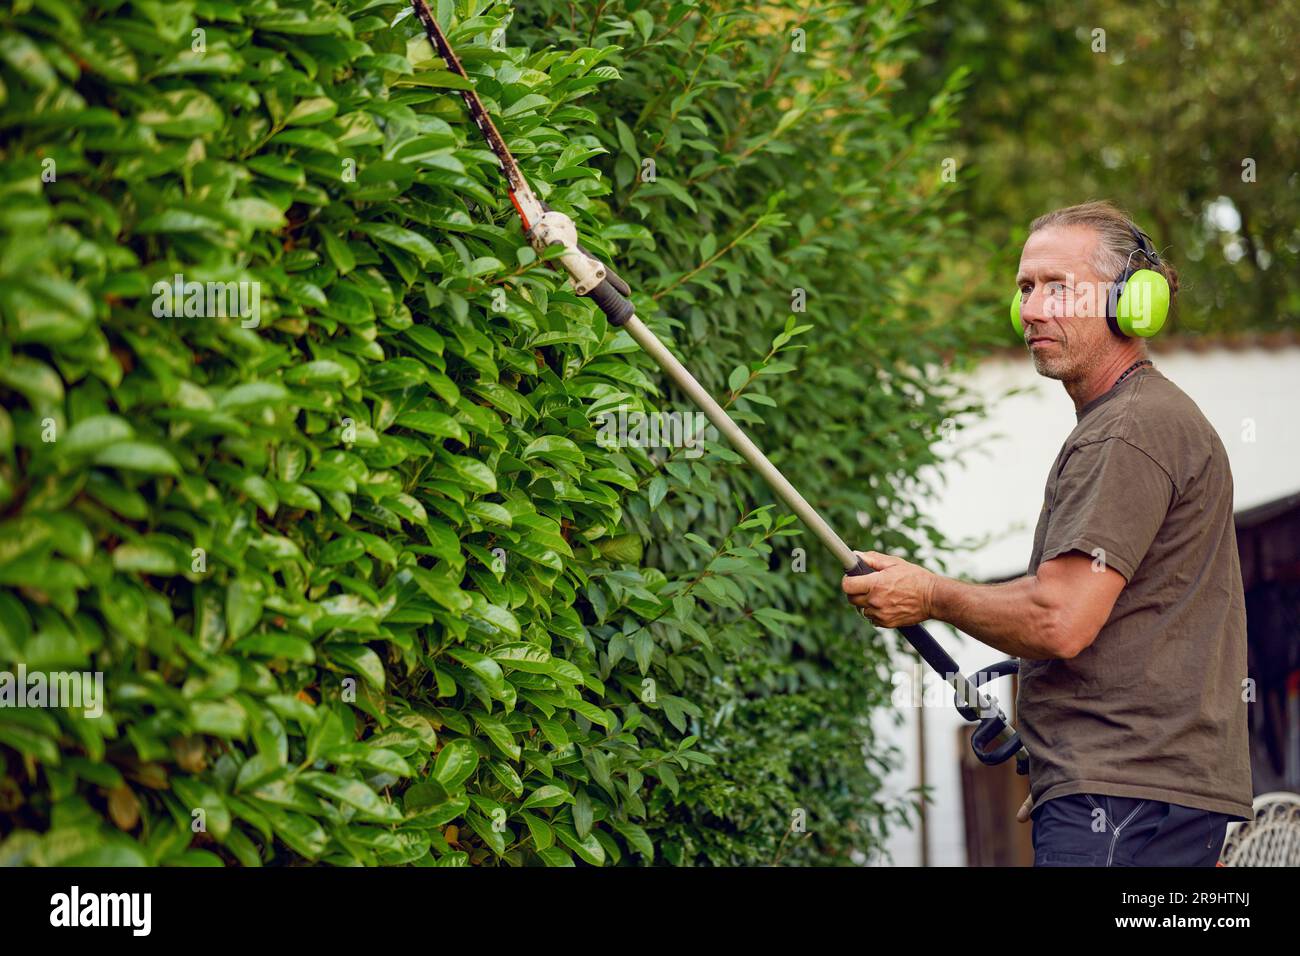 Gardener trimming a hedgerow using a hedge trimmer in the garden of a customer with earmuffs on for protection Stock Photo